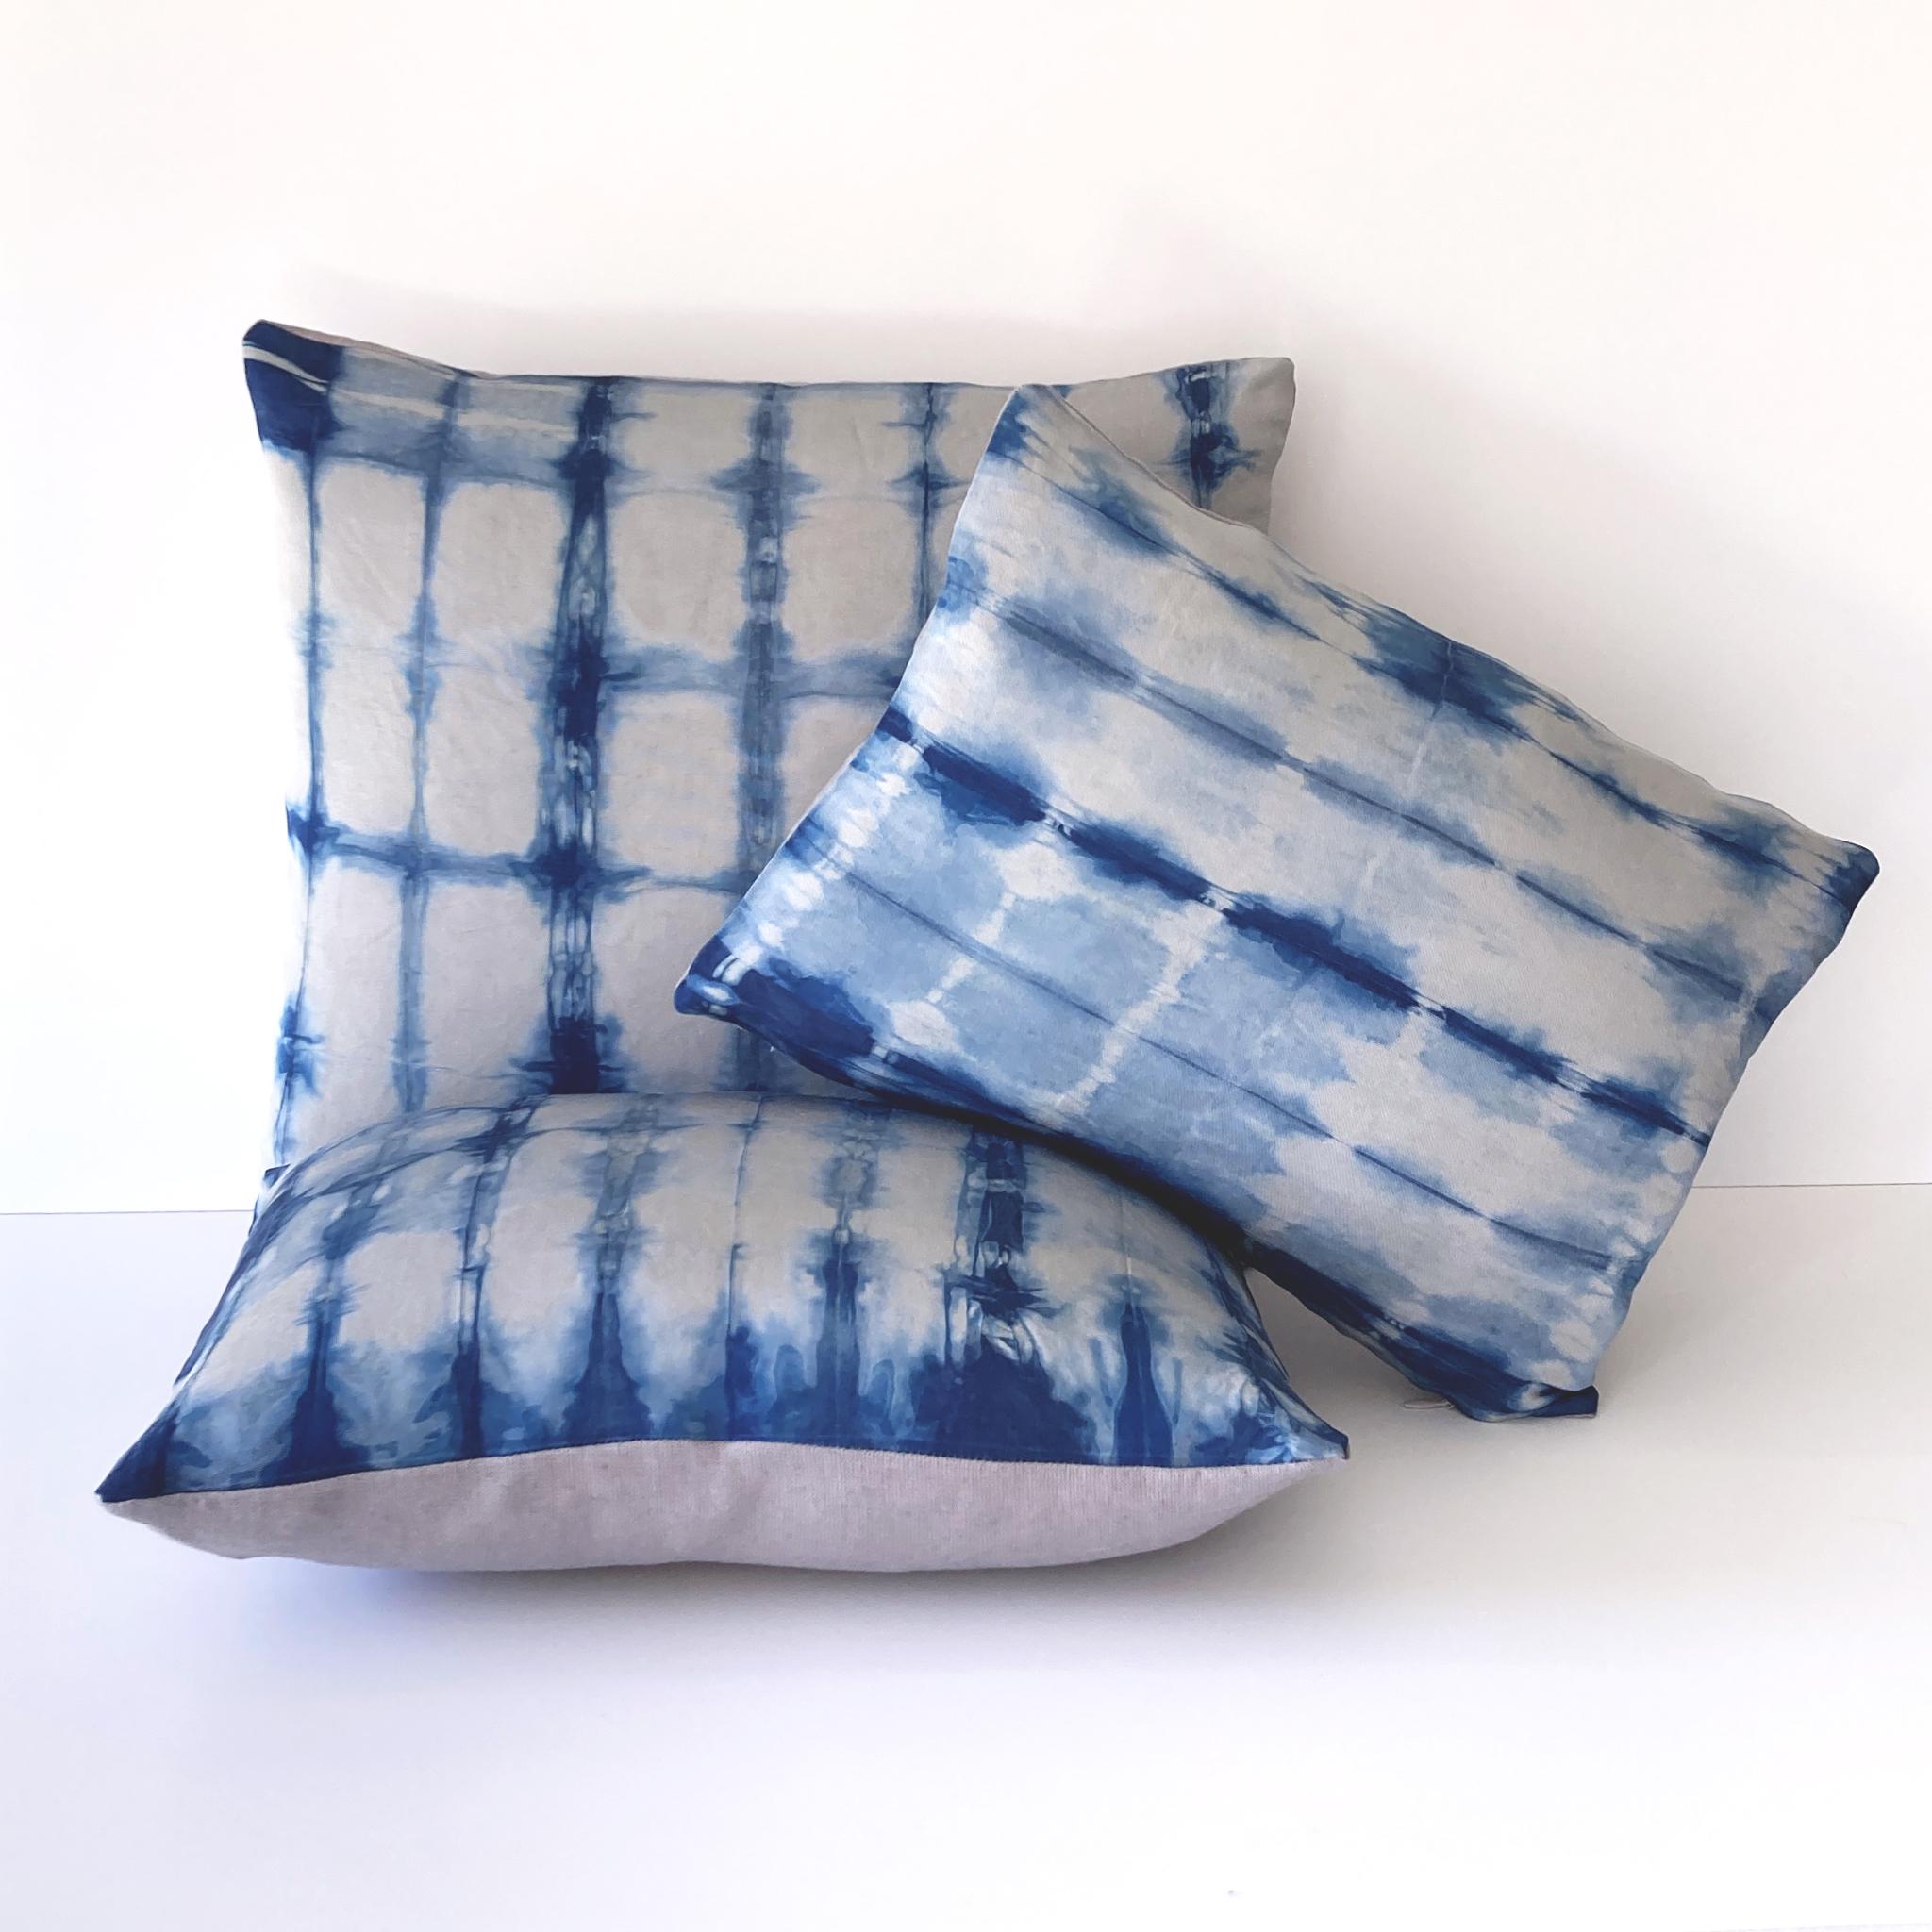 Silver gray silk faille pillow dyed with indigo in Dash pattern with gray linen backing. Hand-dyed and sewn in New York City, down pillow insert made locally in NYC. Pillow measures 12 x 16 inches. Each silk pillow is hand made and one of a